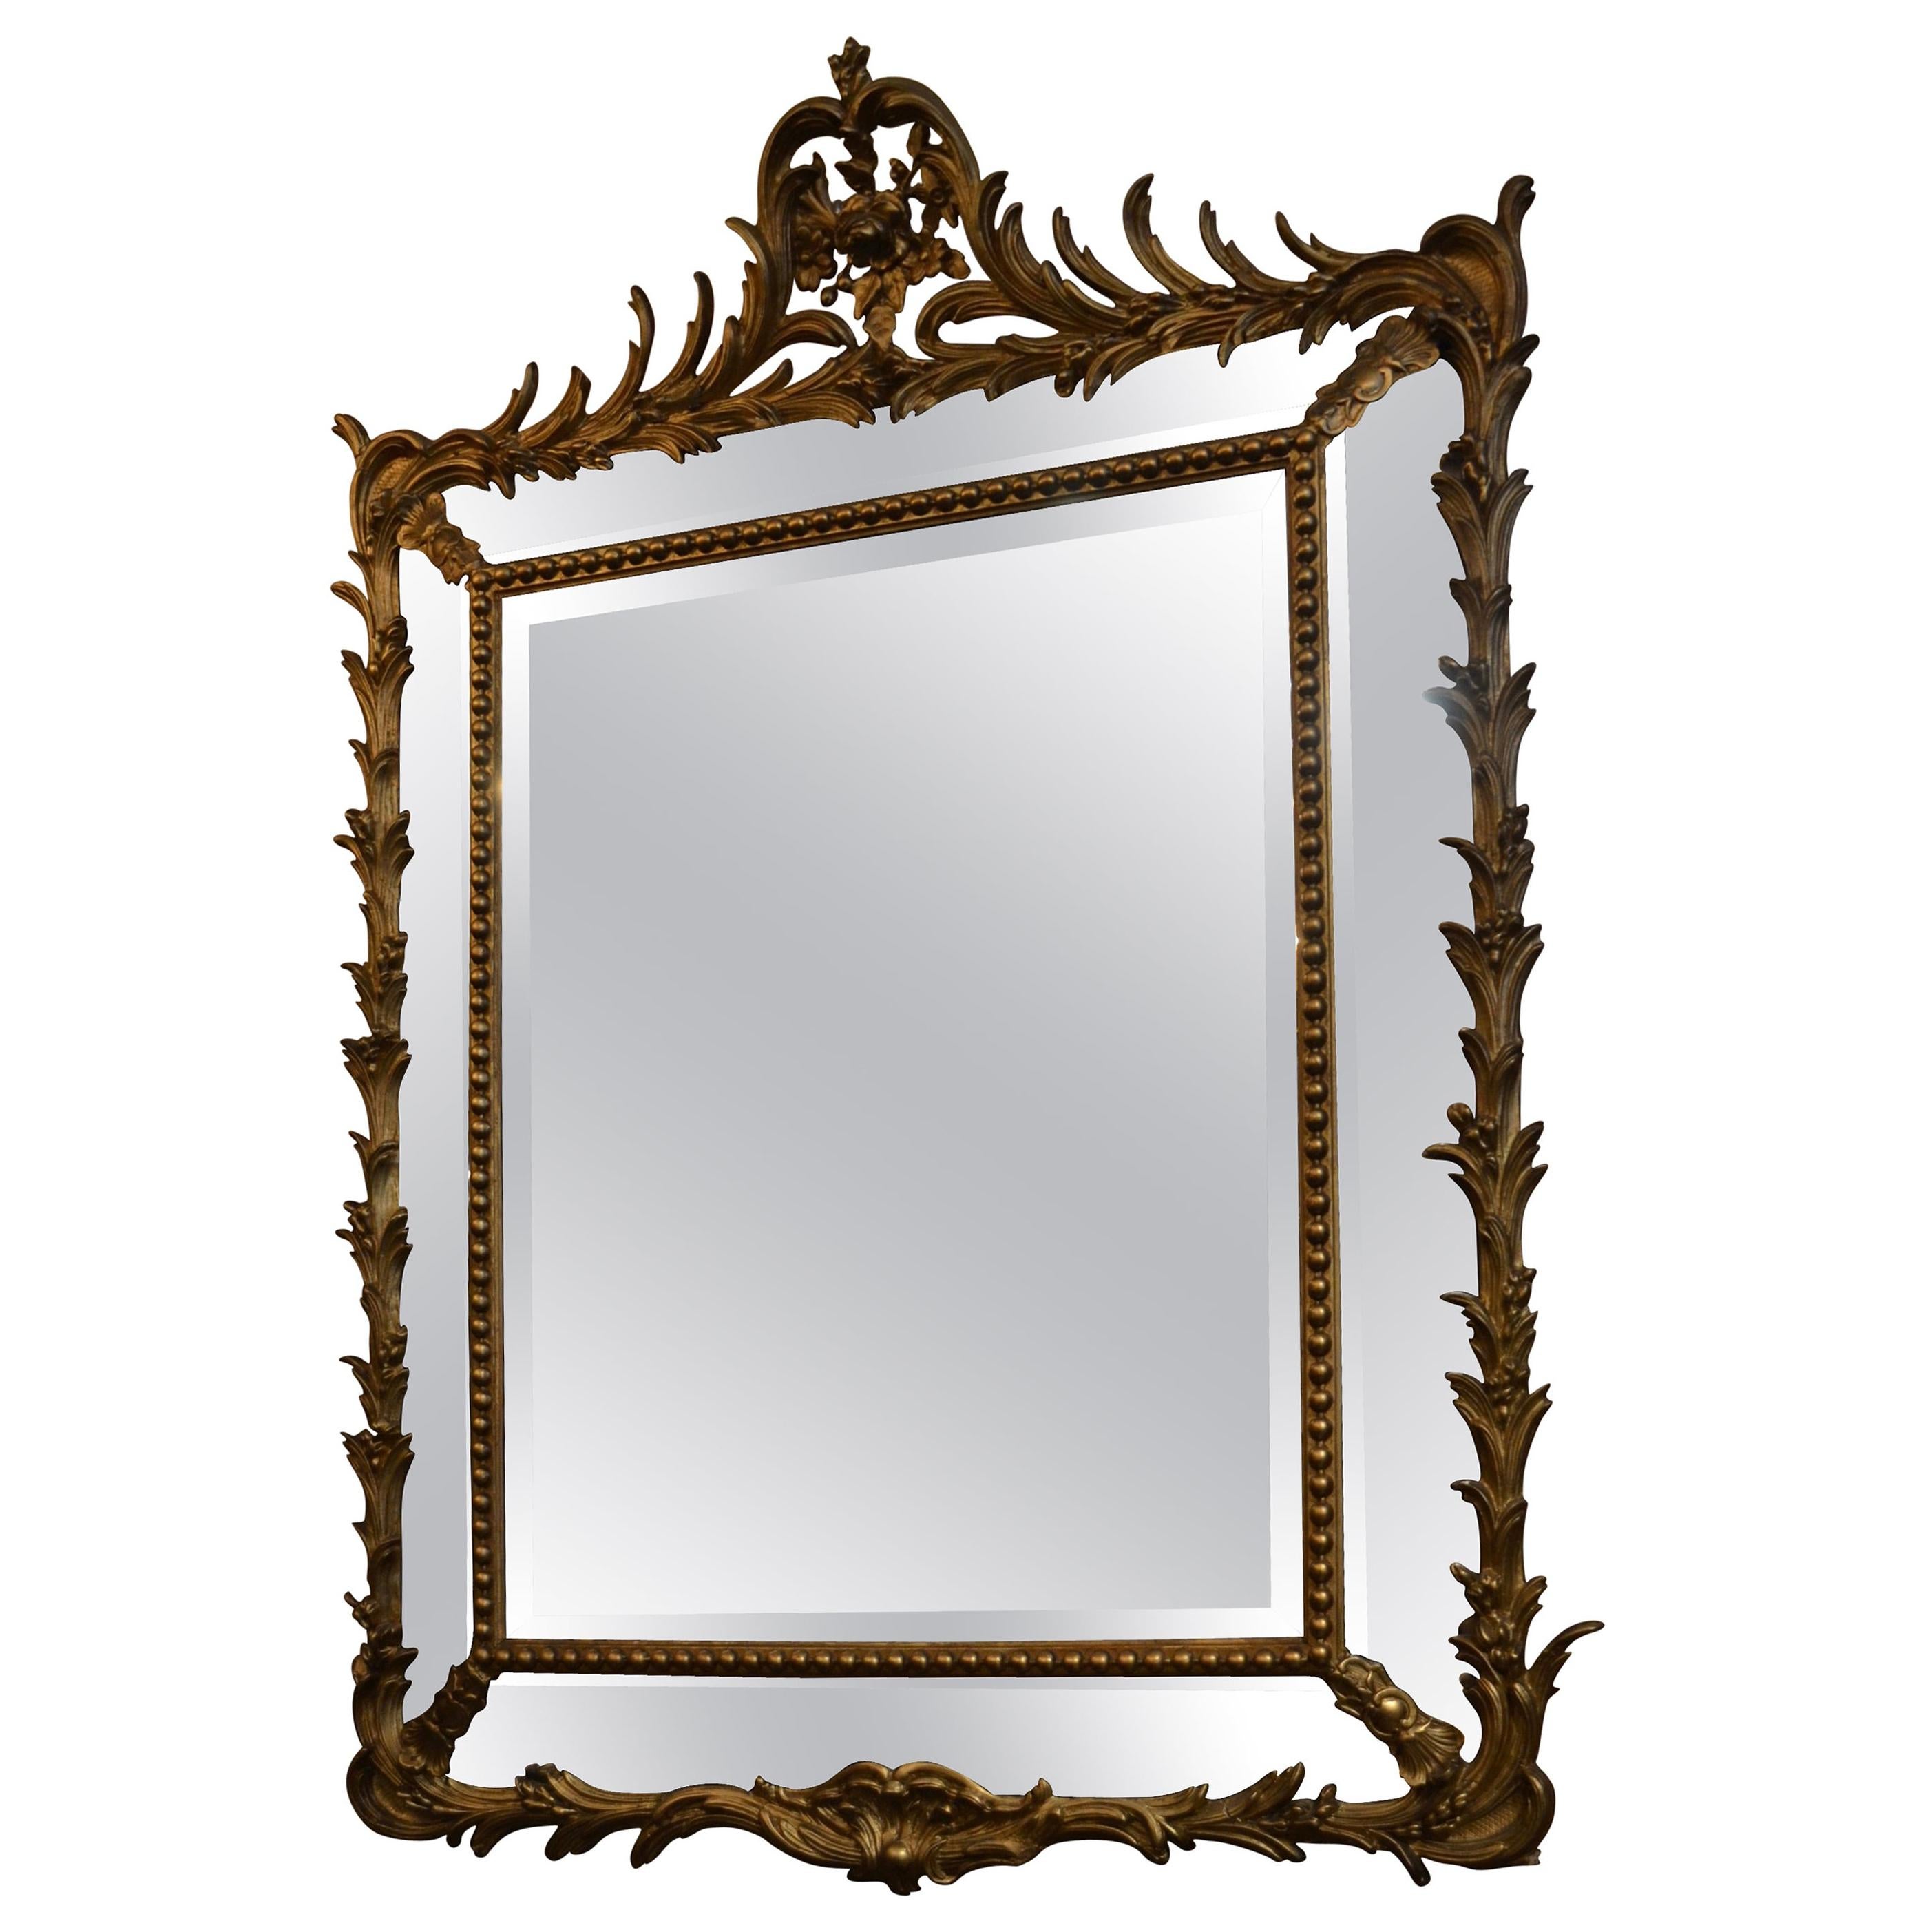 Antique 19th Century French Gold Wood Double Paneled Beveled Mirror, circa 1890 For Sale